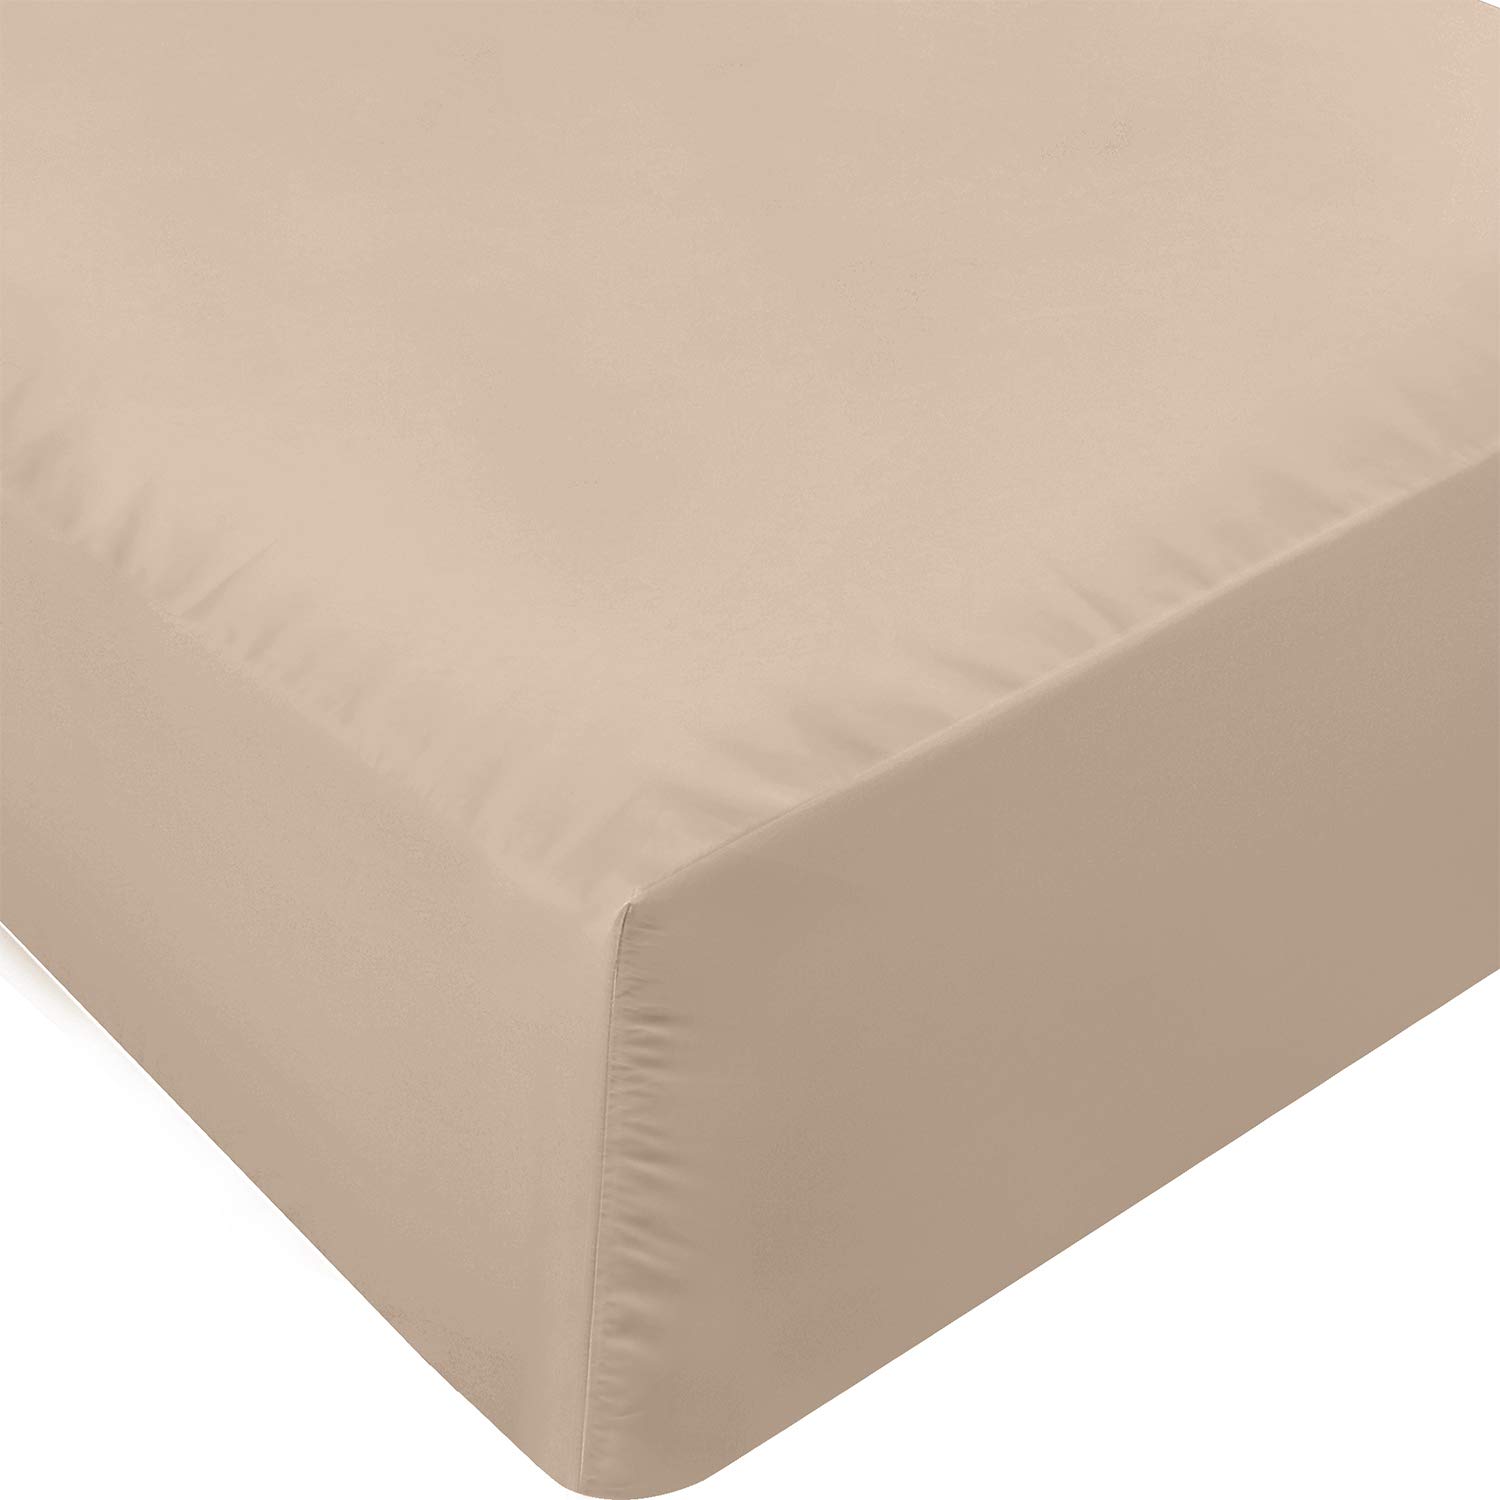 Book Cover Utopia Bedding Queen Fitted Sheet - Bottom Sheet - Deep Pocket - Soft Microfiber -Shrinkage and Fade Resistant-Easy Care -1 Fitted Sheet Only (Beige) Queen Beige